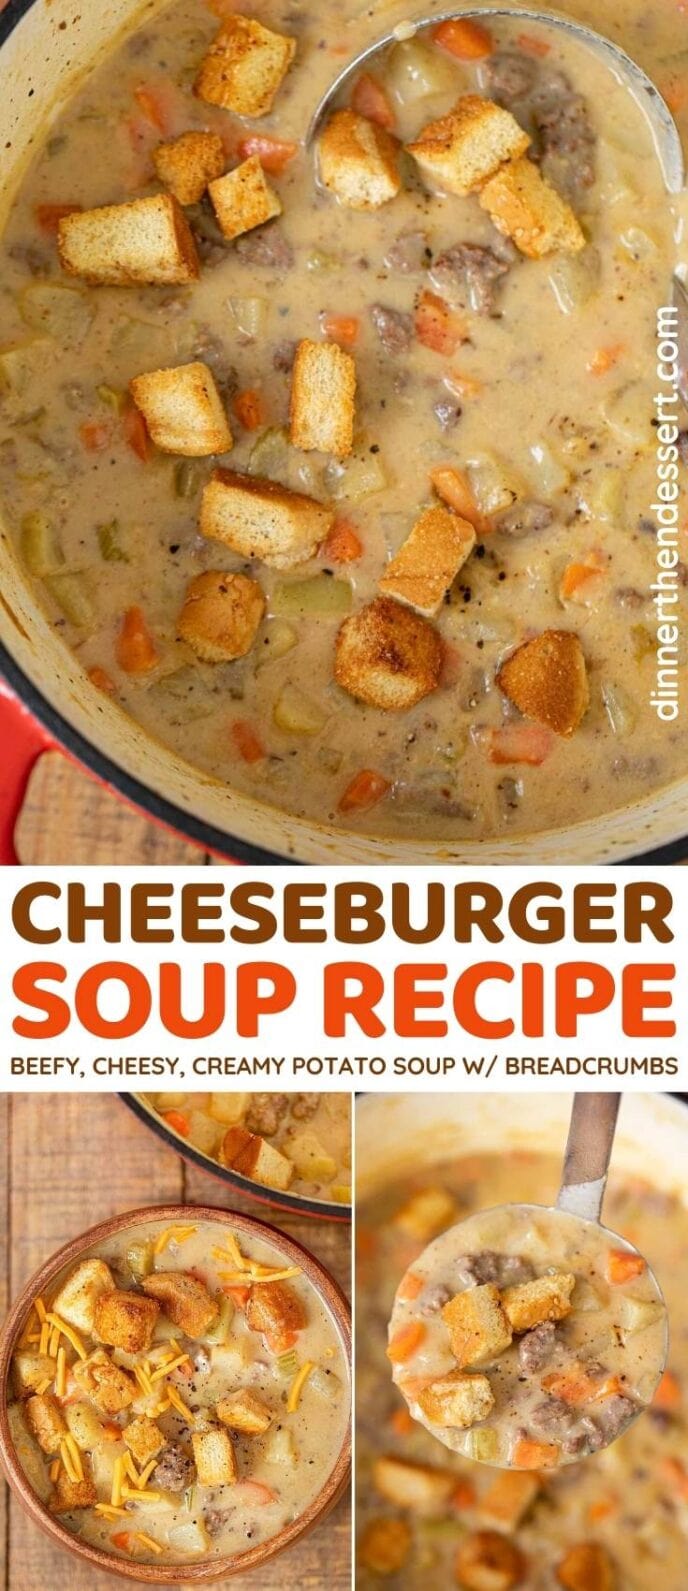 Cheeseburger Soup collage